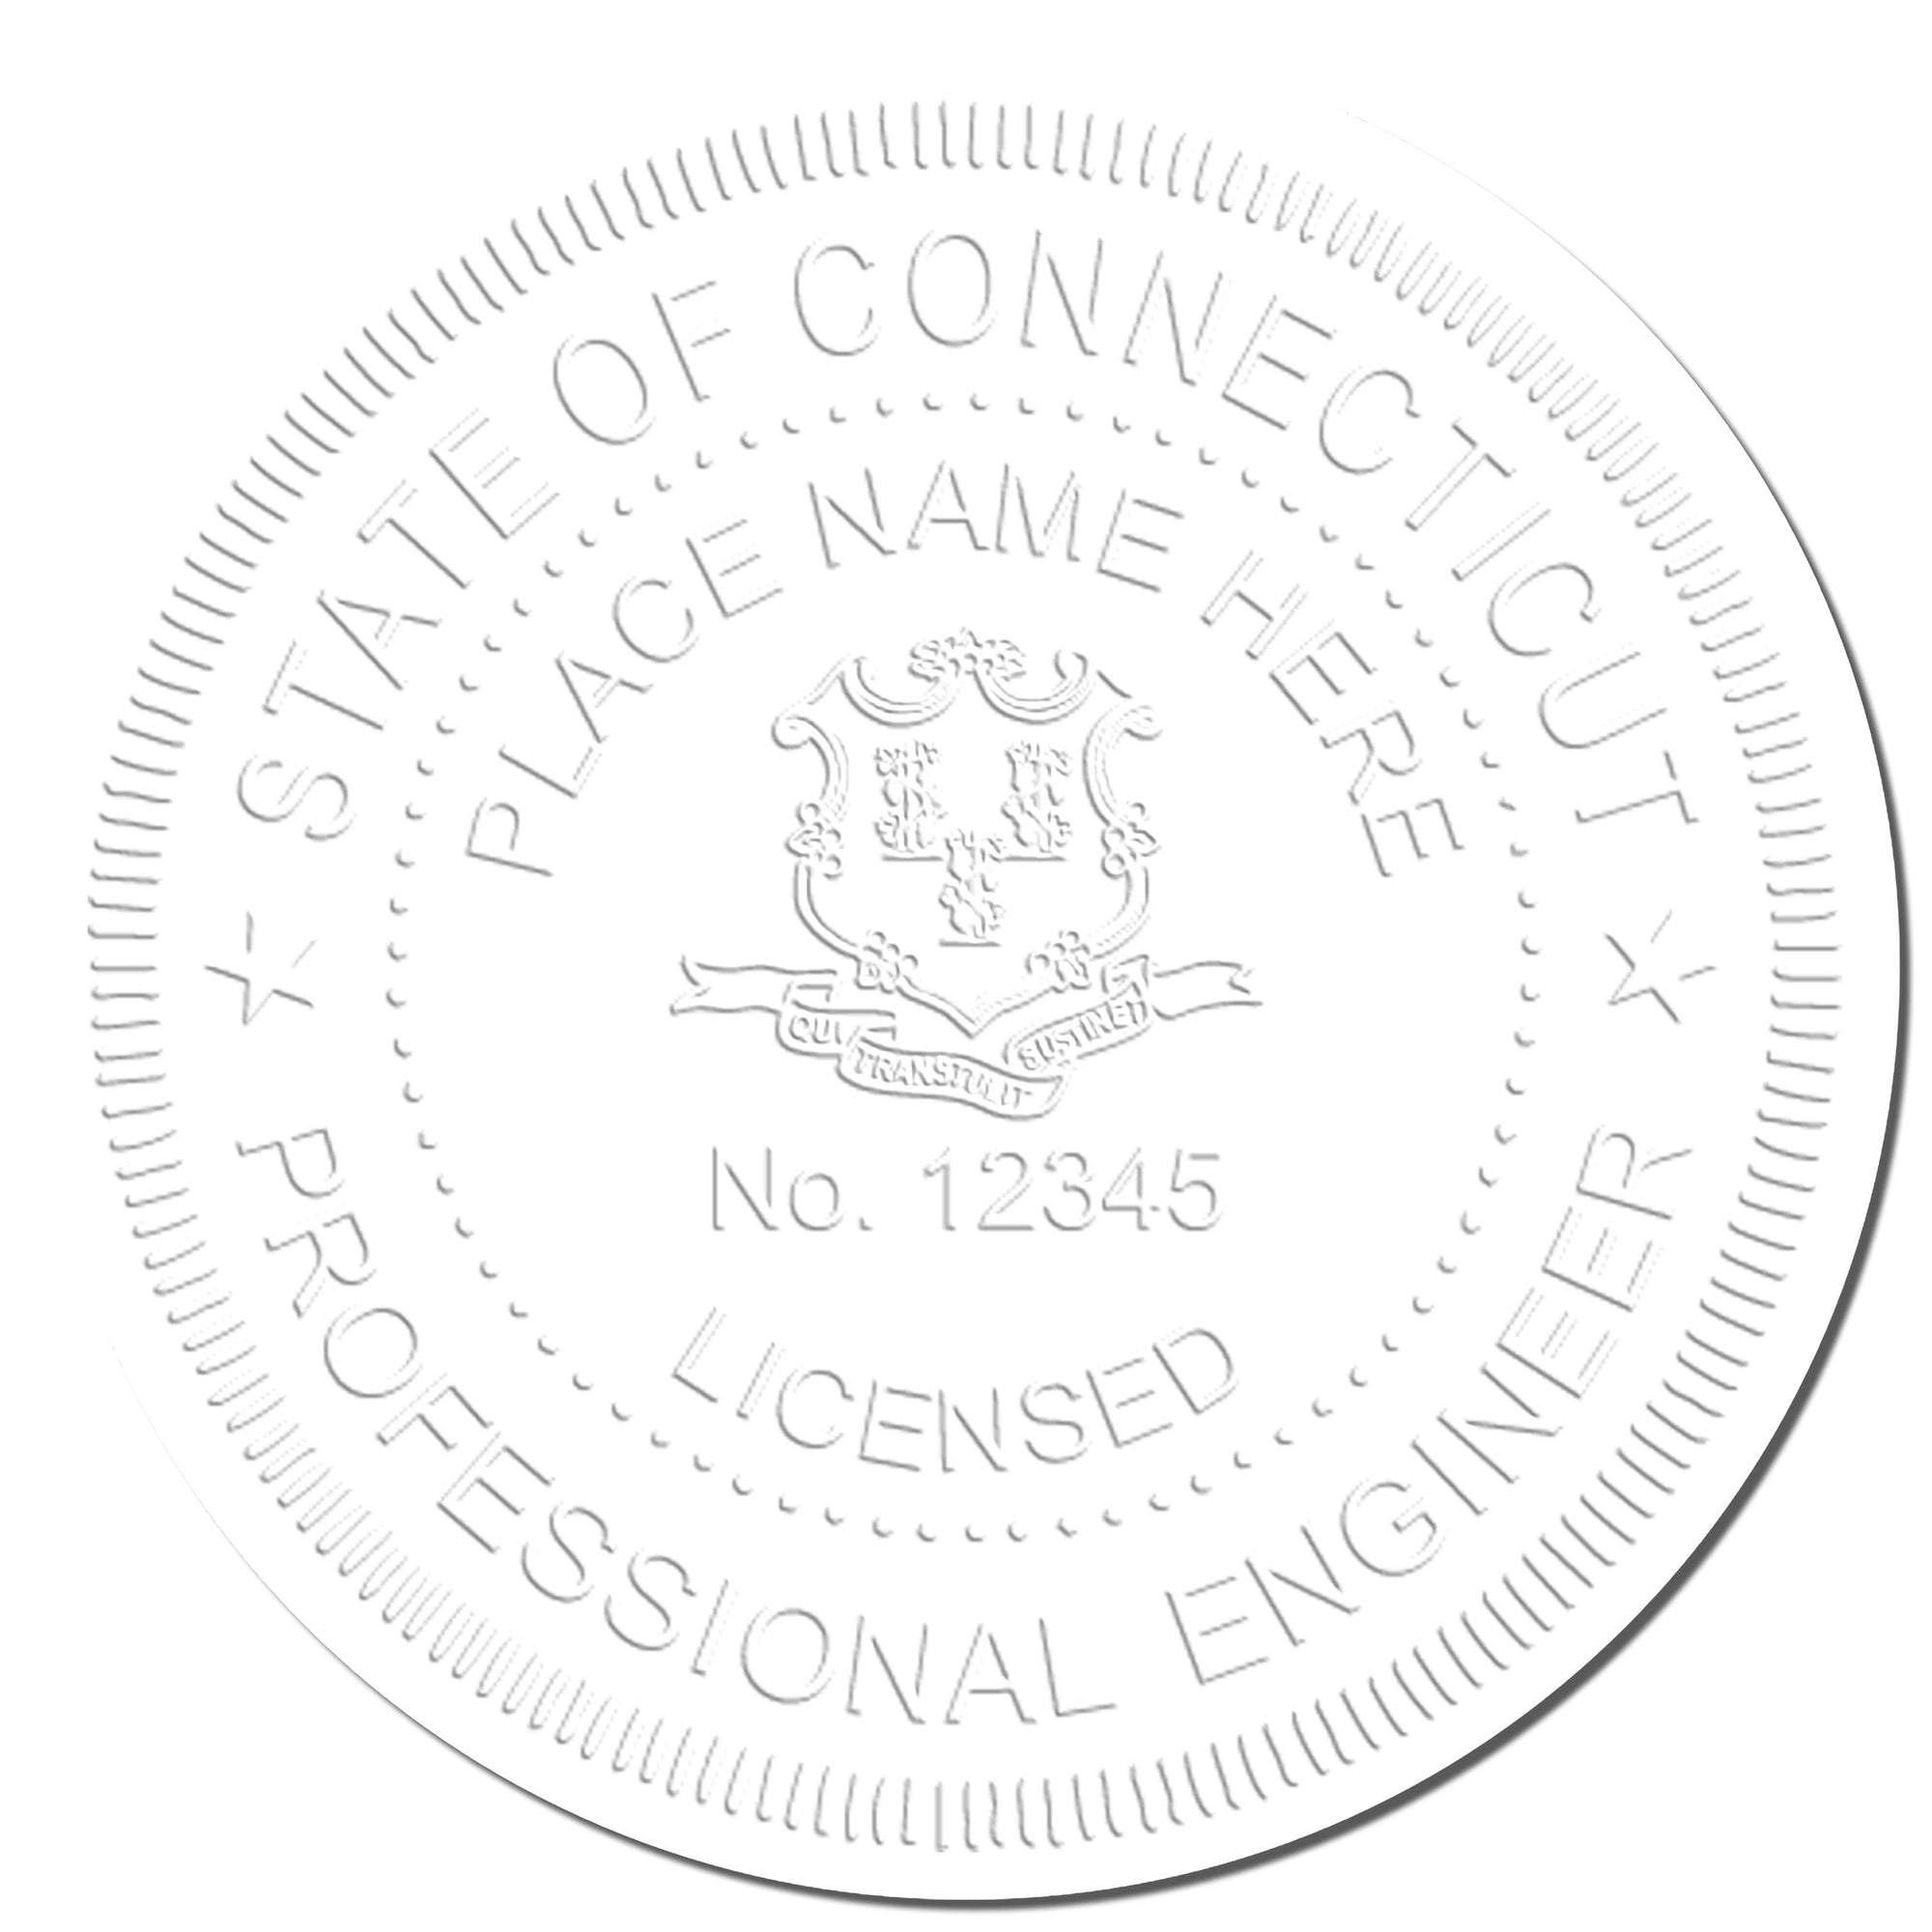 The main image for the Connecticut Engineer Desk Seal depicting a sample of the imprint and electronic files